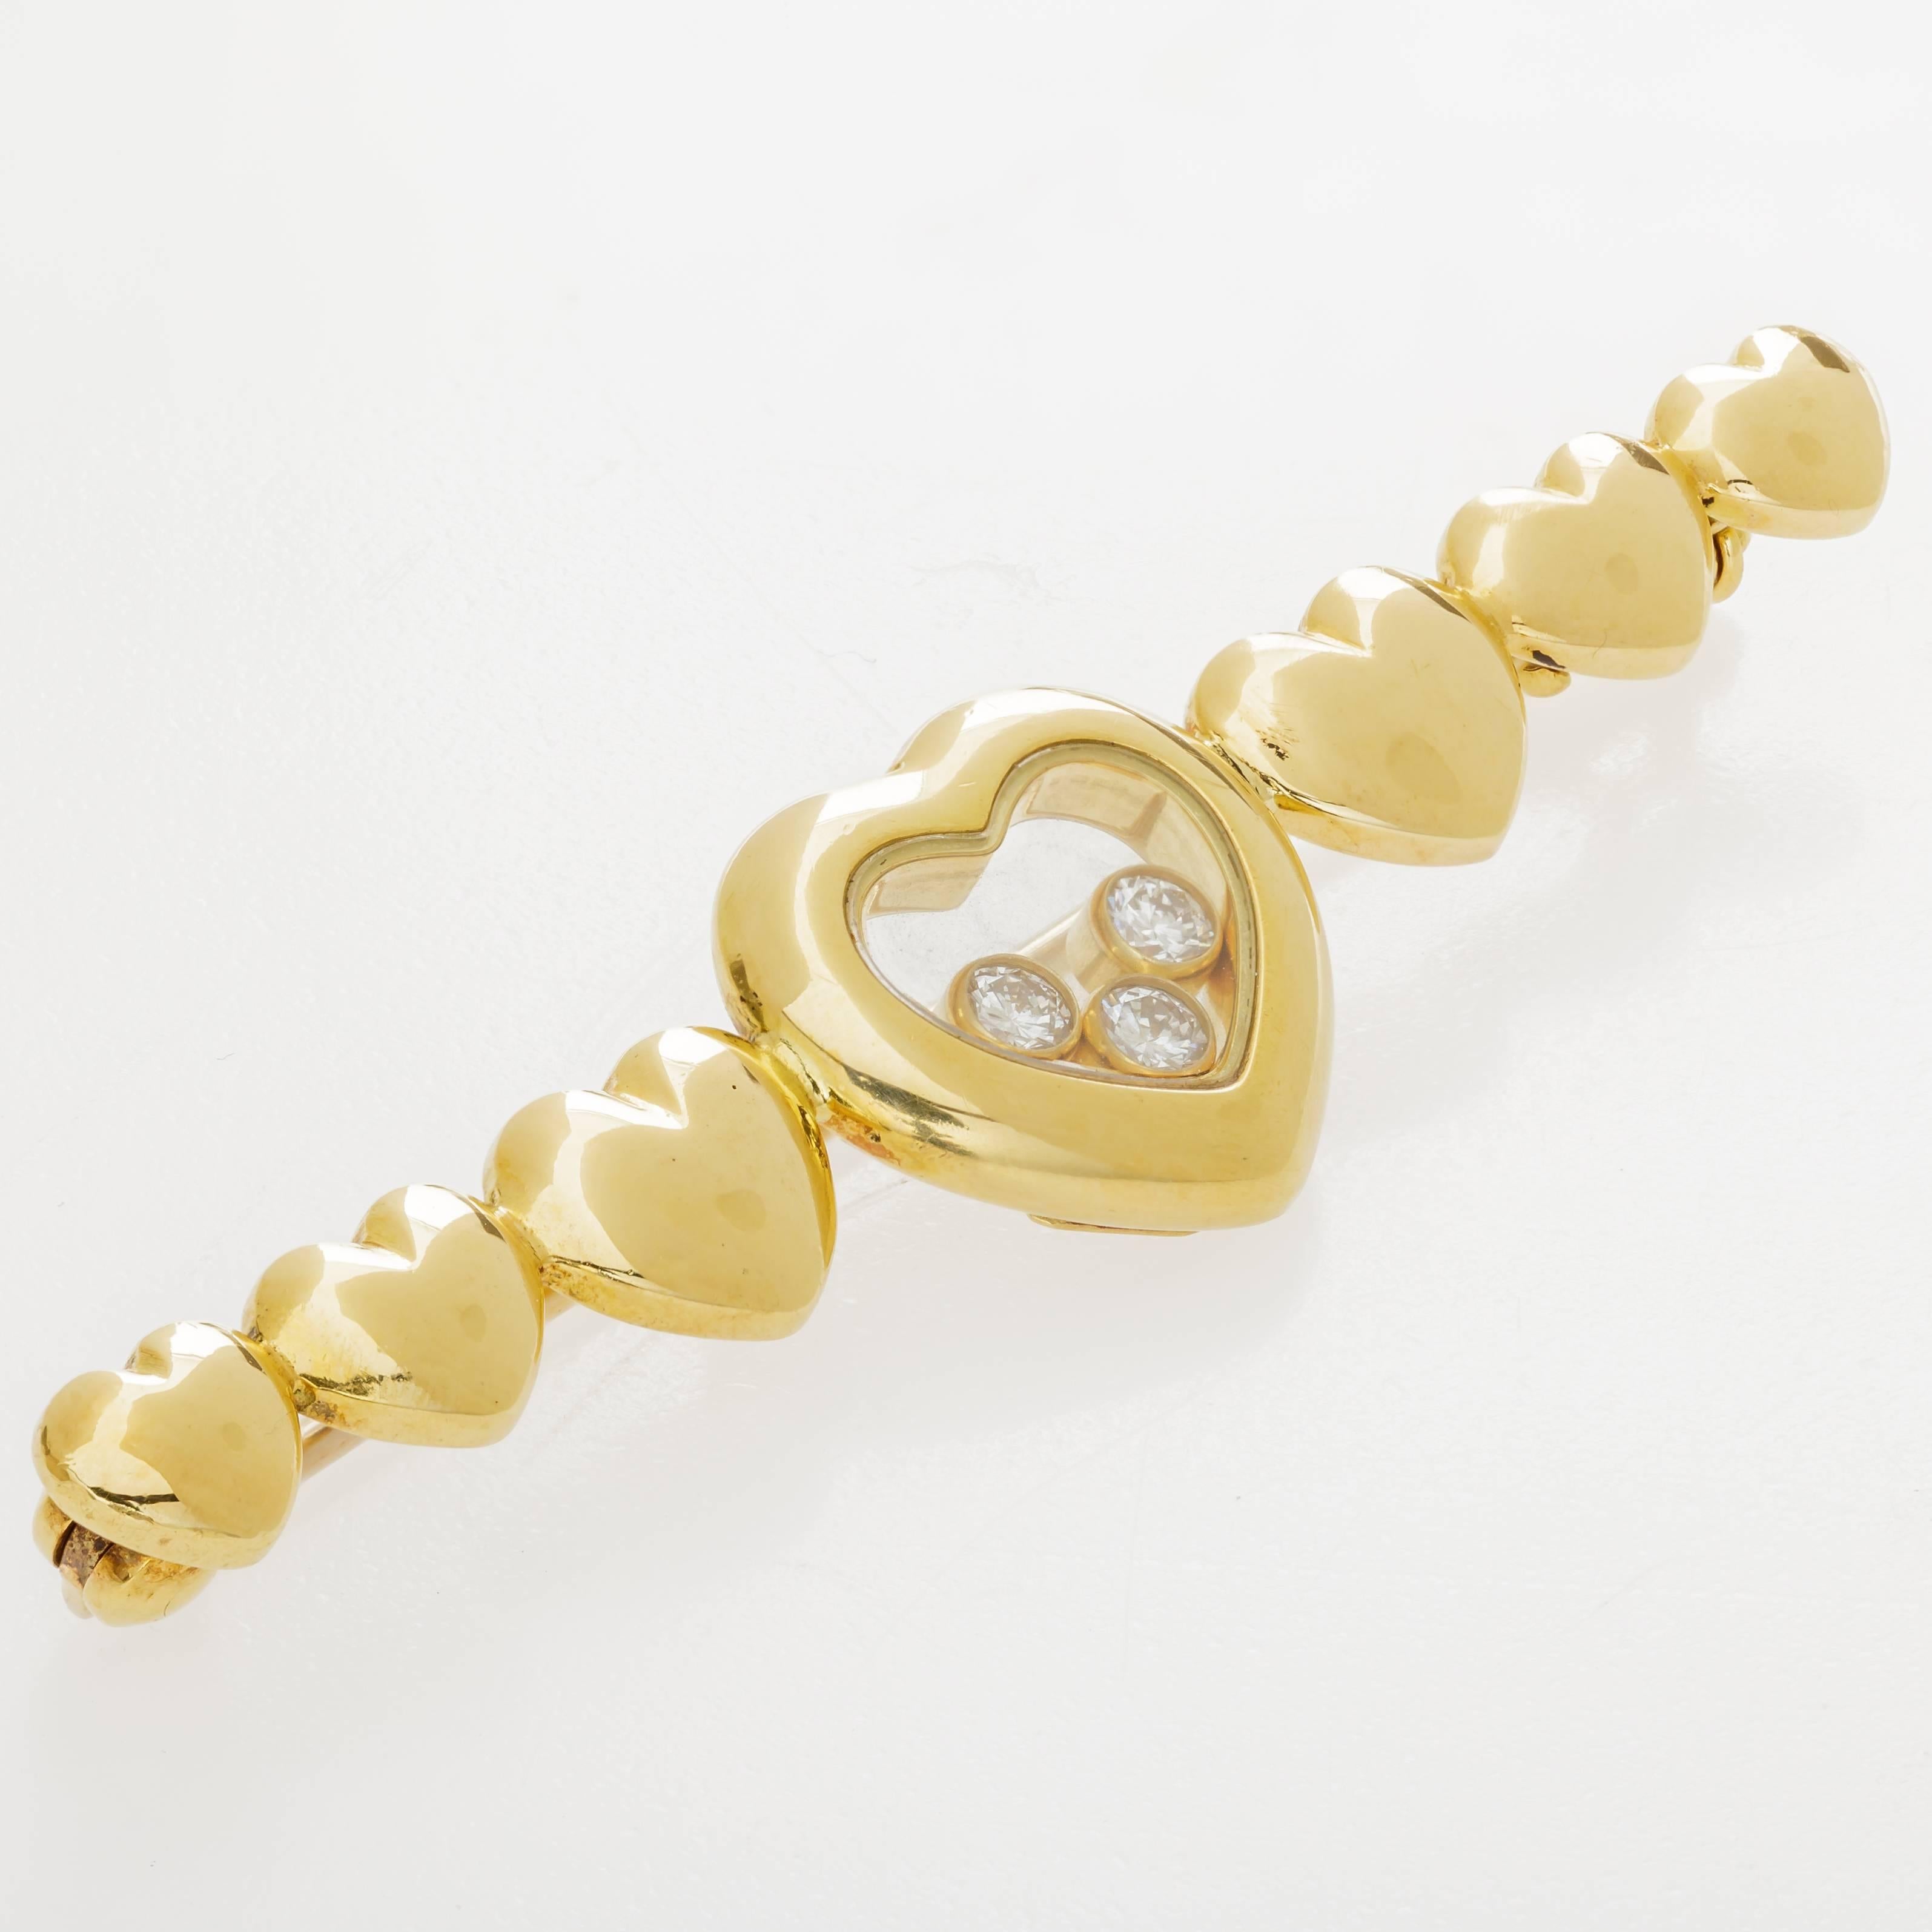 This Chopard Happy Diamonds pin features a design of seven hearts in 18K yellow gold, with the middle heart containing 3 floating diamonds totaling 0.17 ct.  The pin measures 2